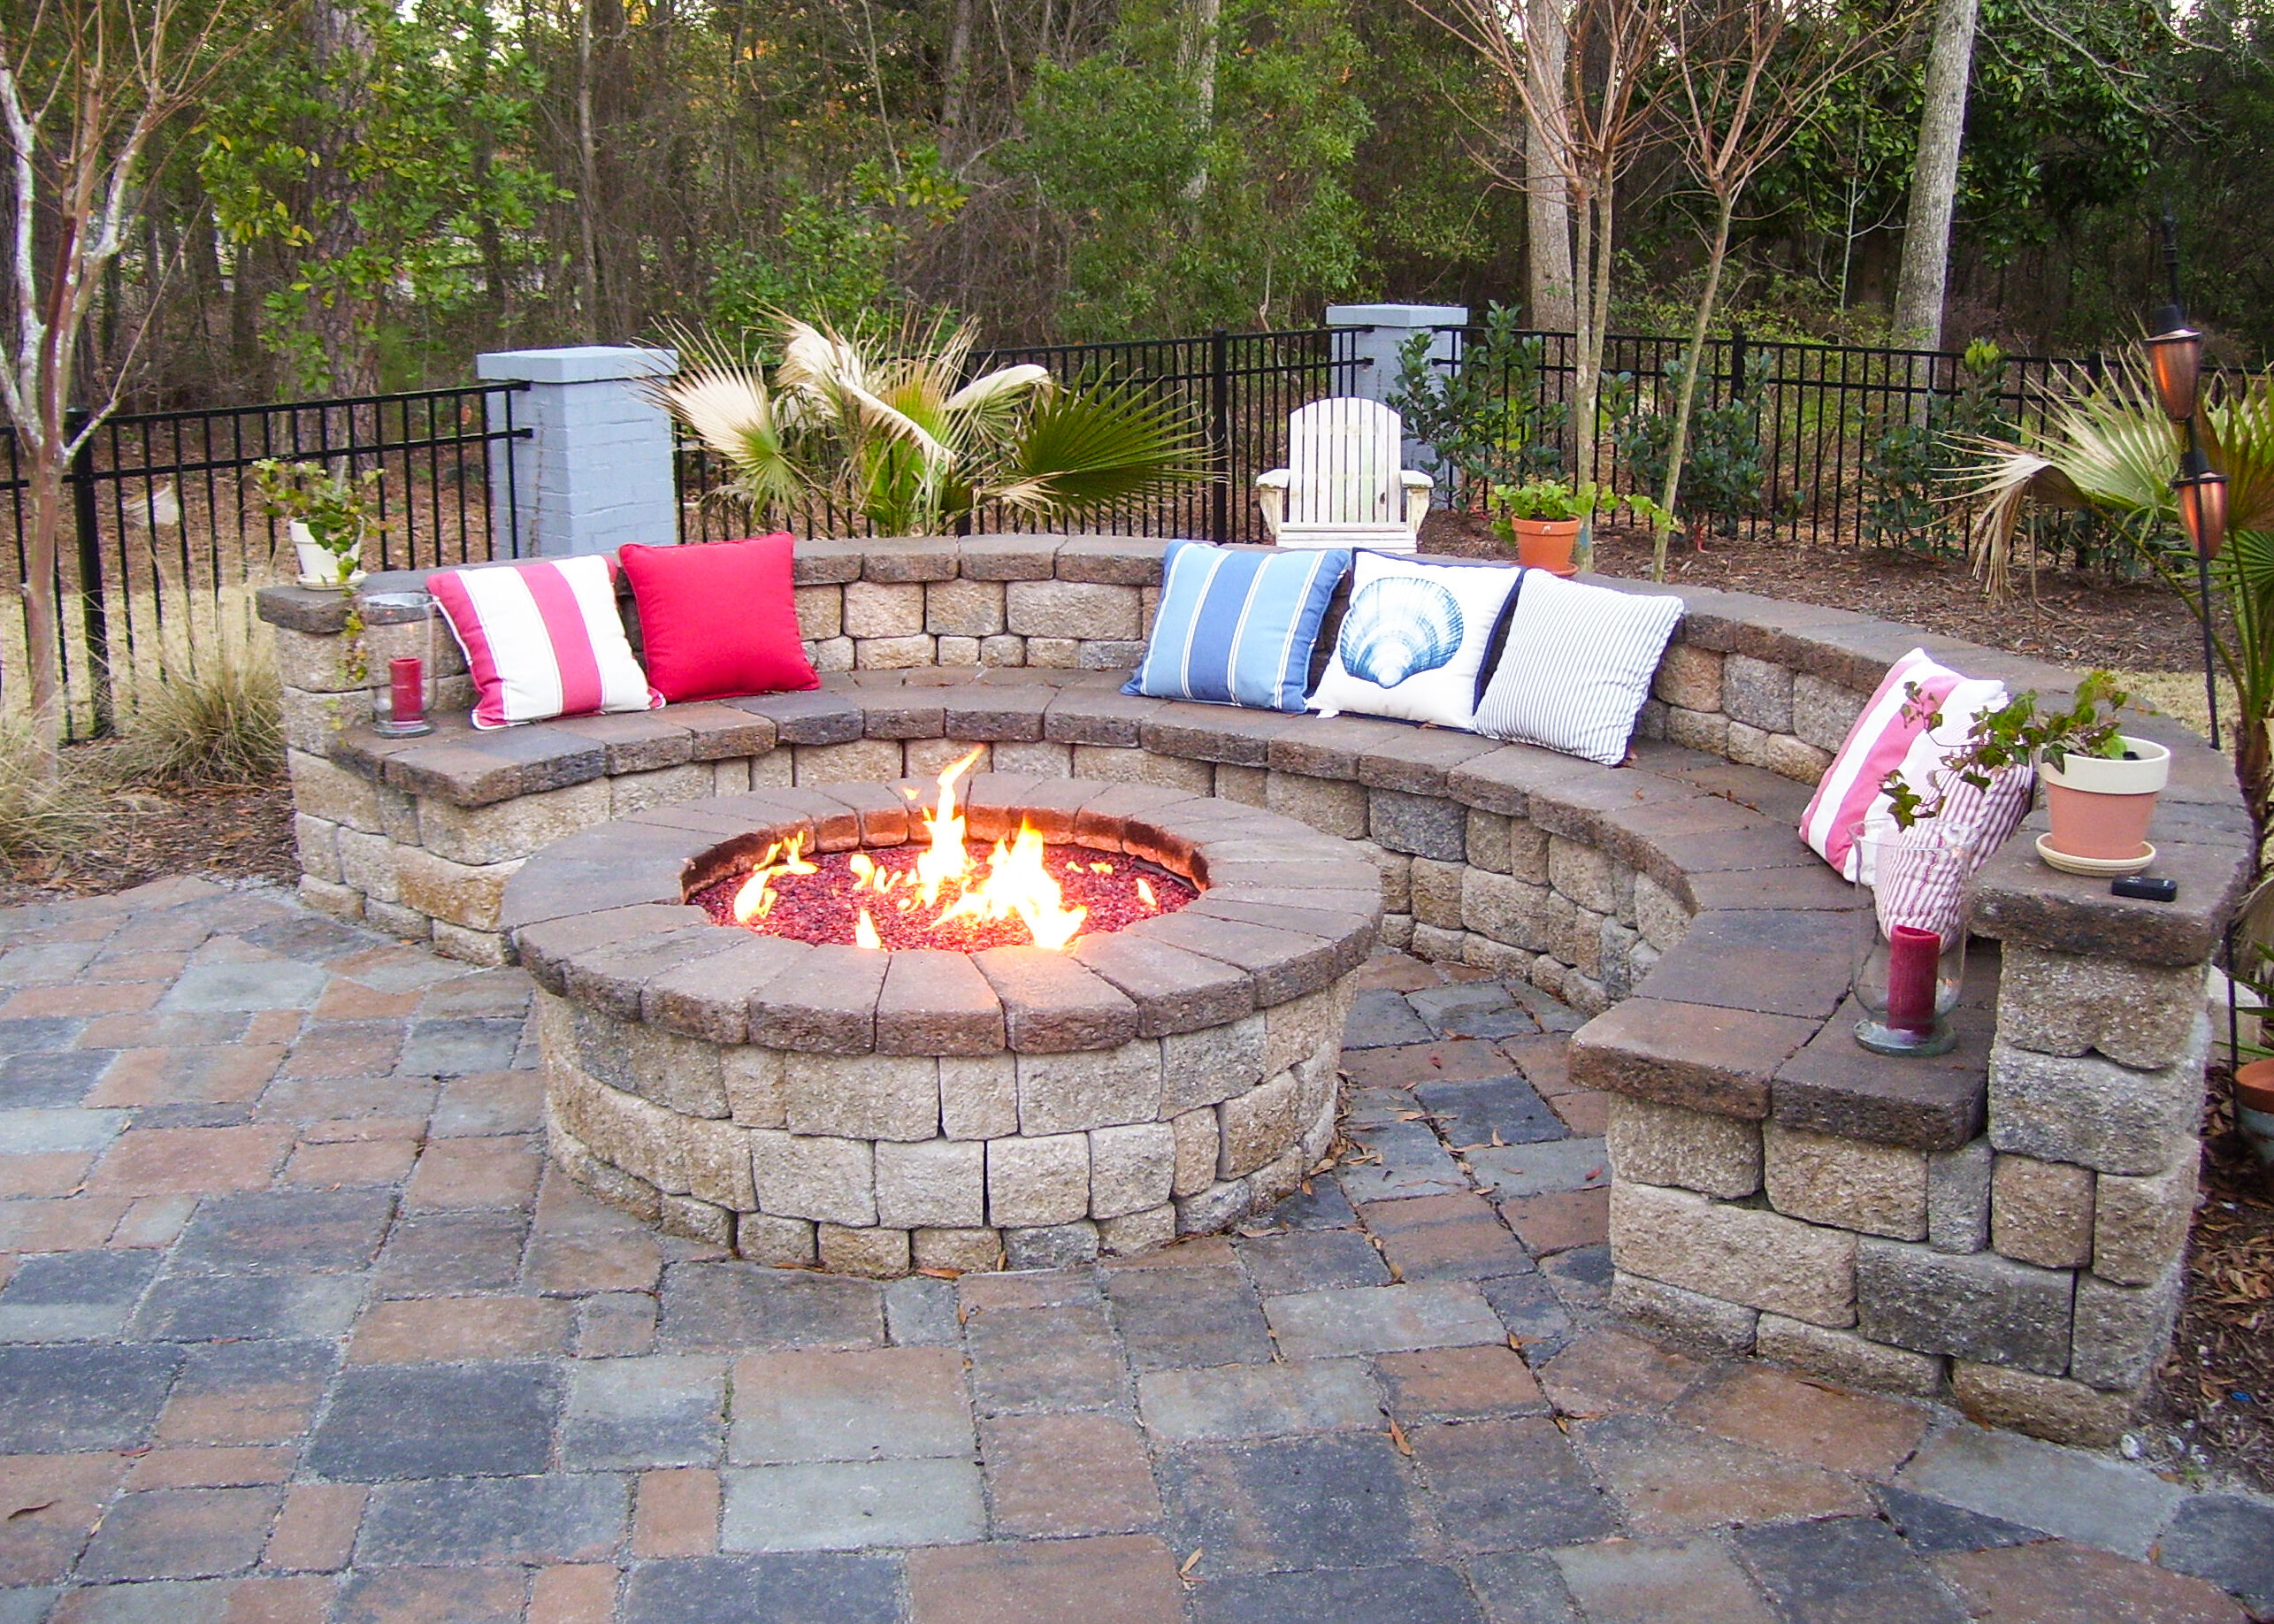 3 Easy Diy Fire Pit Ideas, Combination Gas And Wood Fire Pit